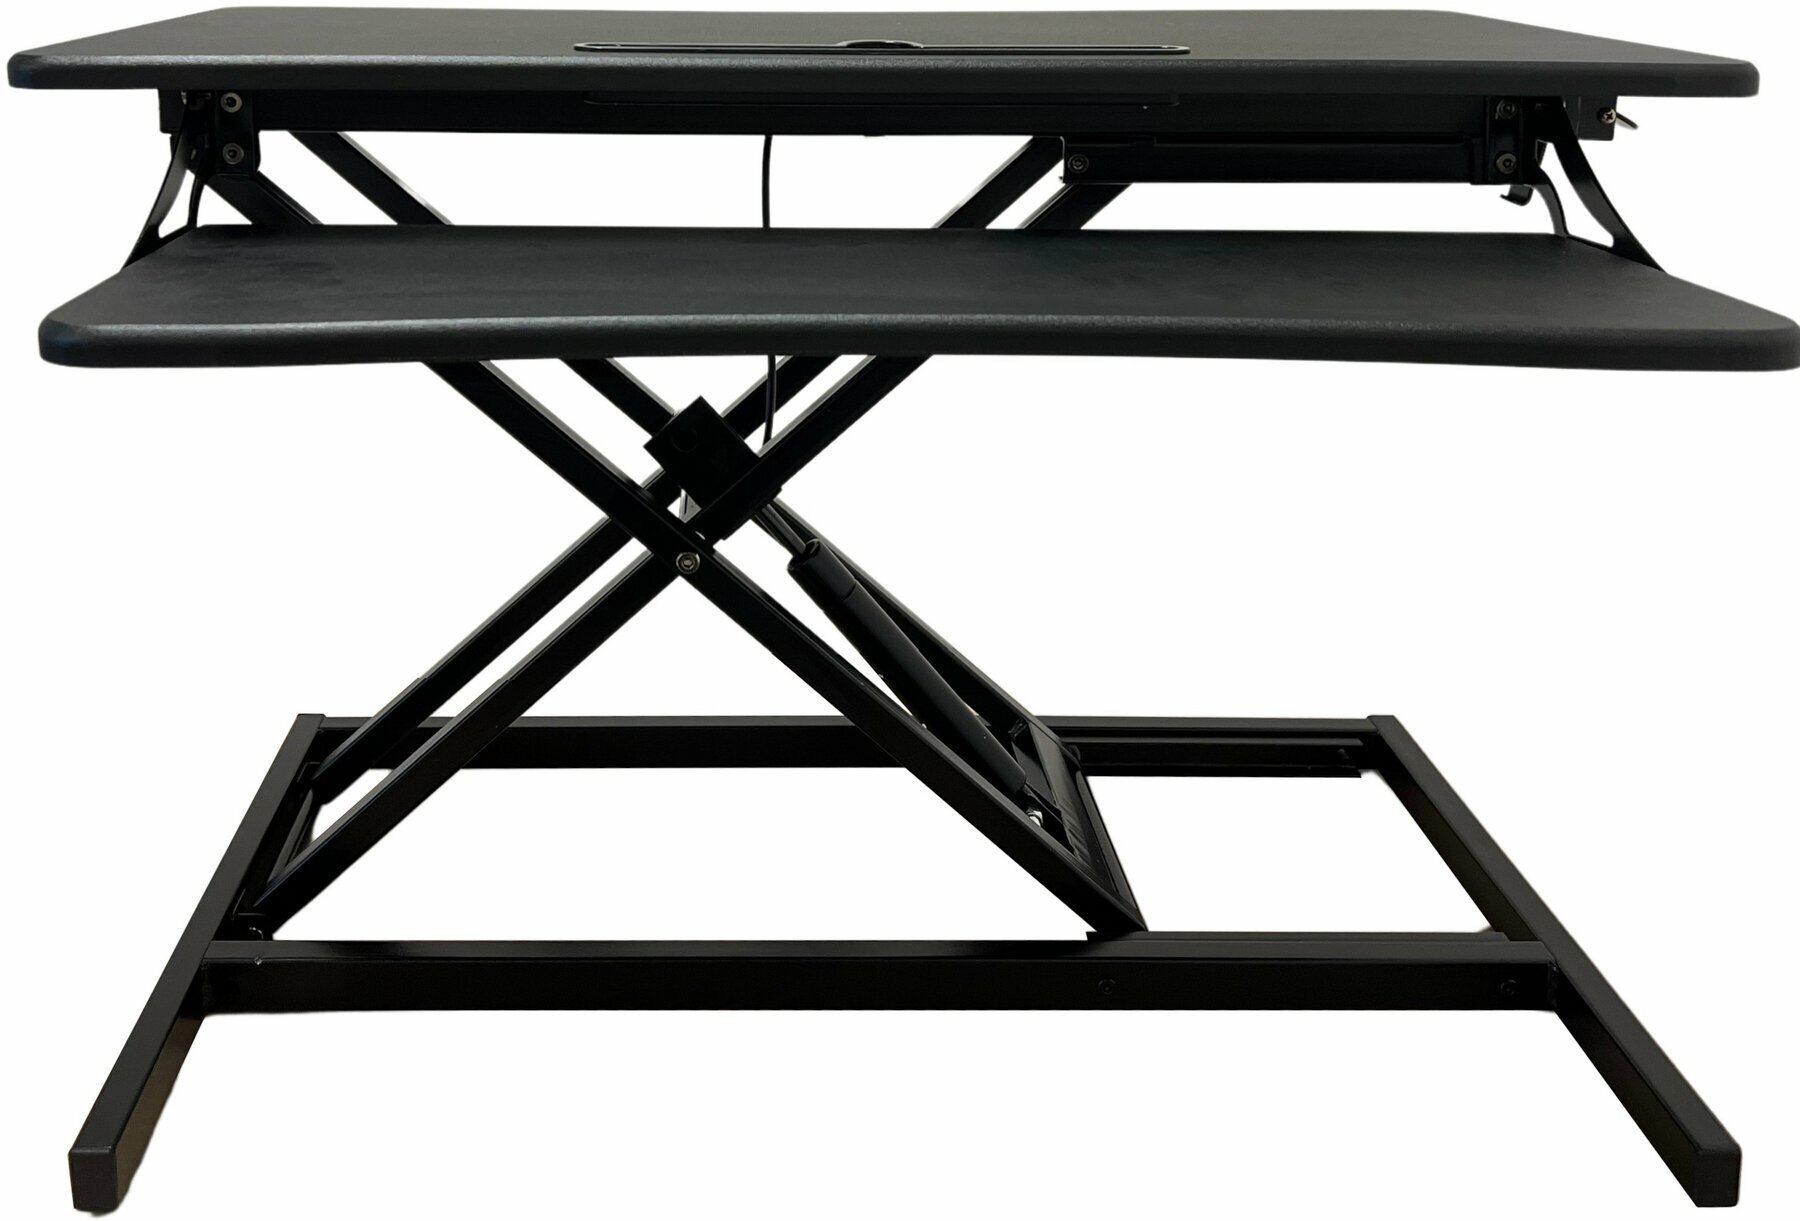 Stand for PC Lewitz Mini Hydraulic Standing Desk AP-E06 (B-Stock) #951150 (Pre-owned)